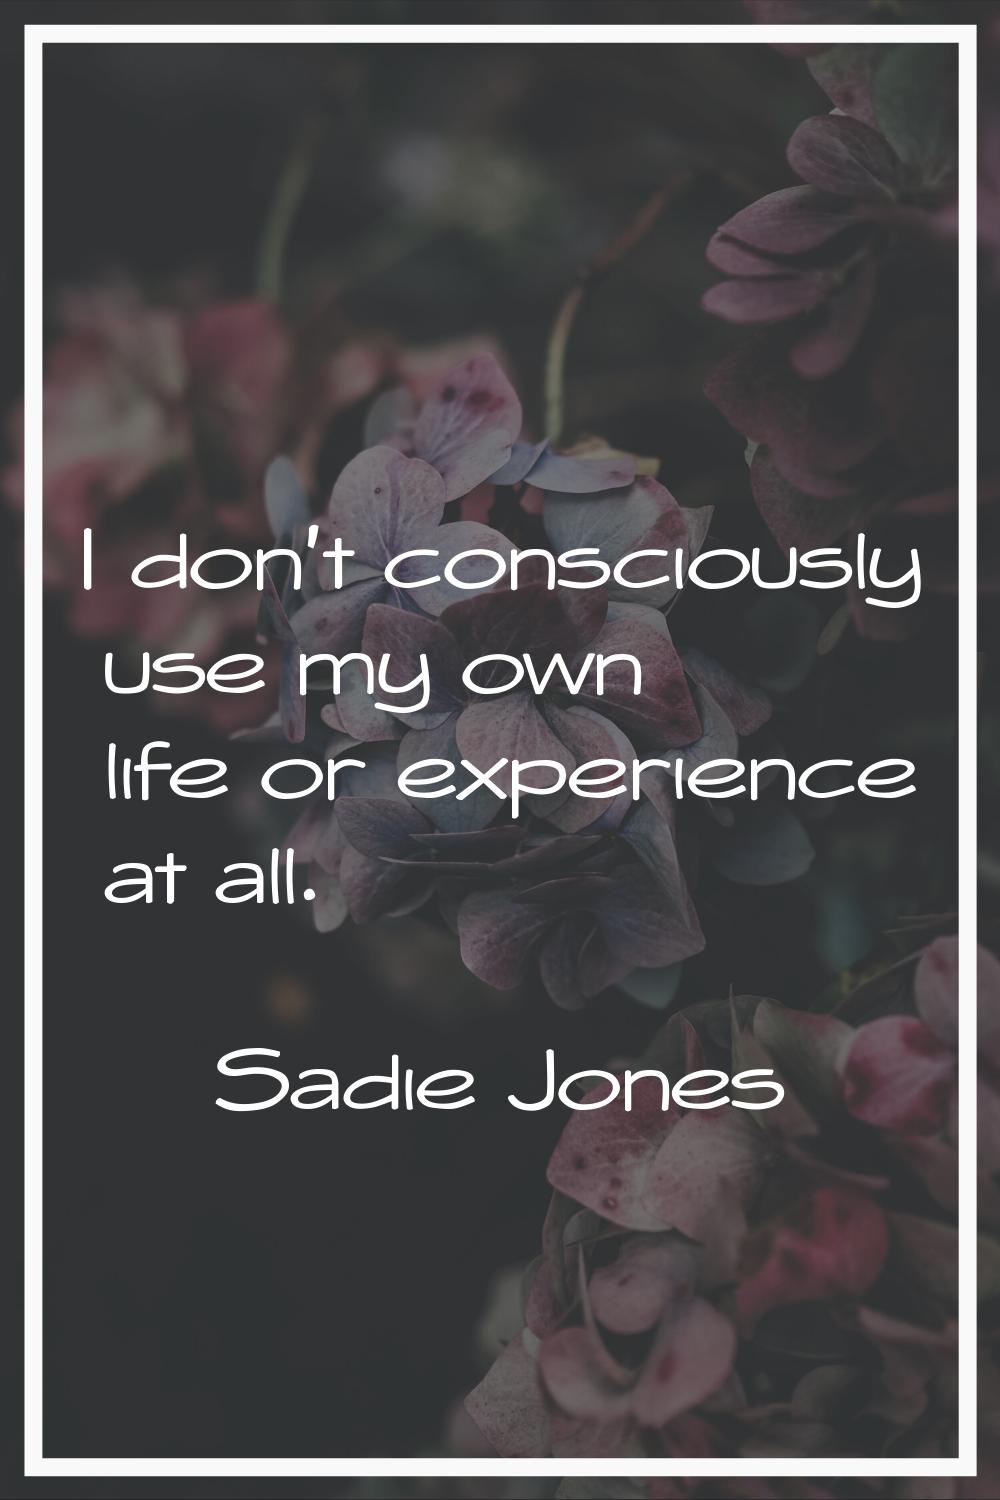 I don't consciously use my own life or experience at all.